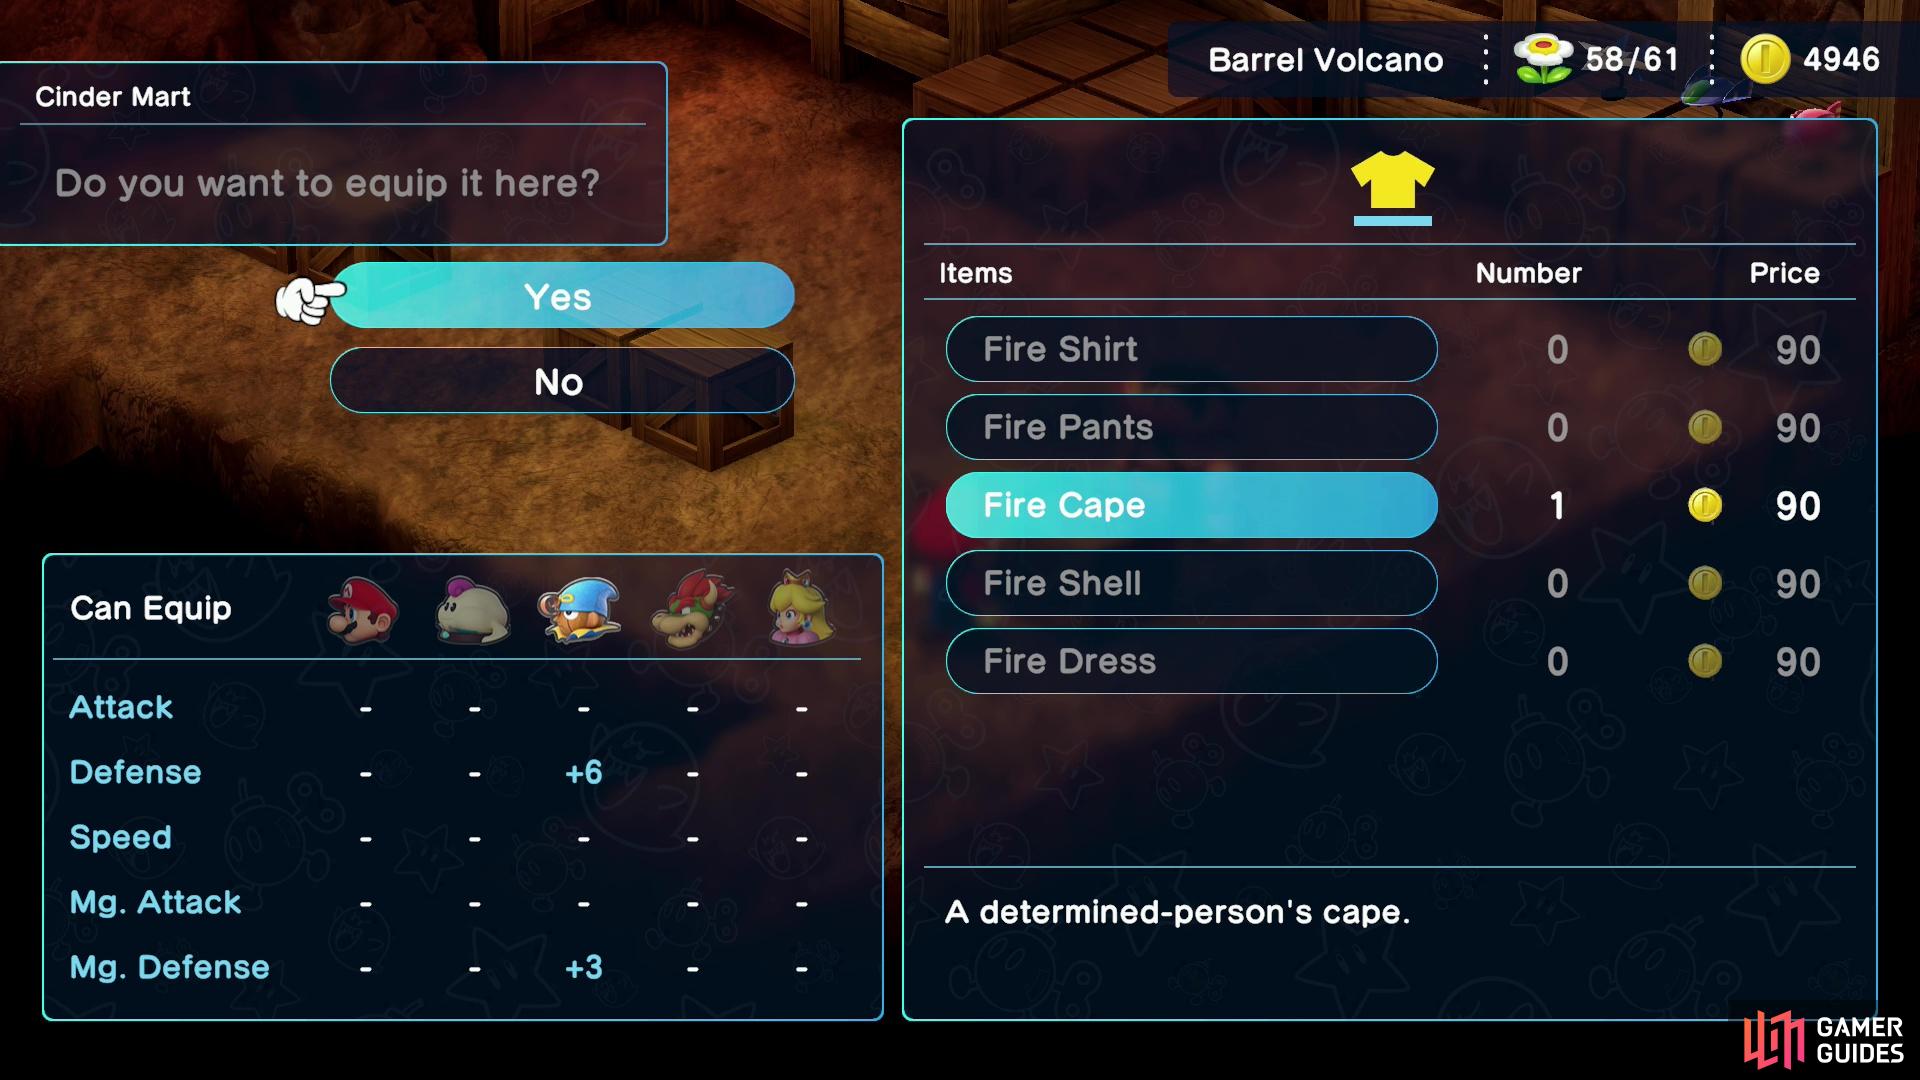 You can purchase new items and armor from Cinder Toad at Cinder Mart.